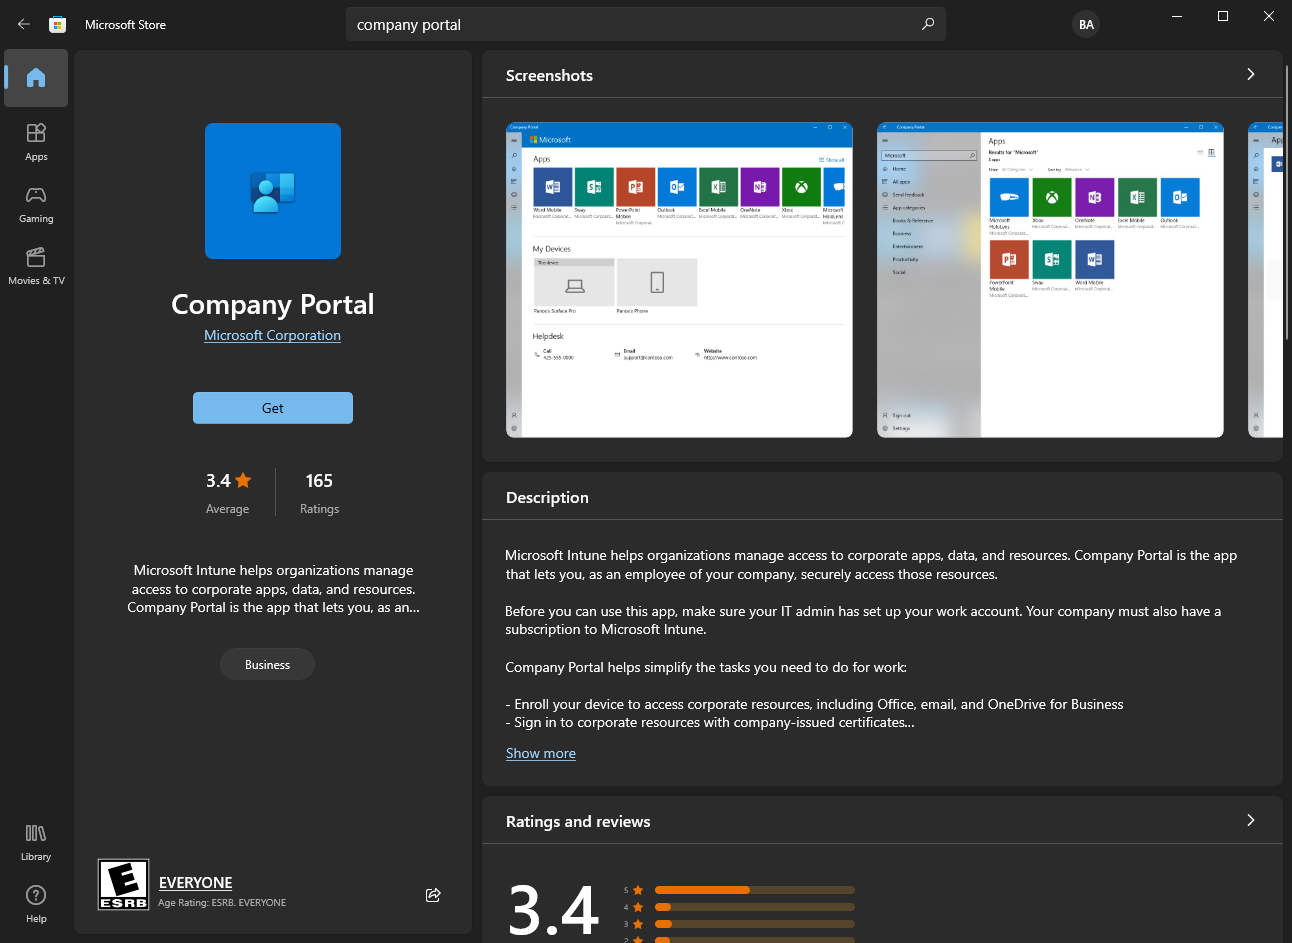 Viewing the Company Portal App in the Microsoft Store